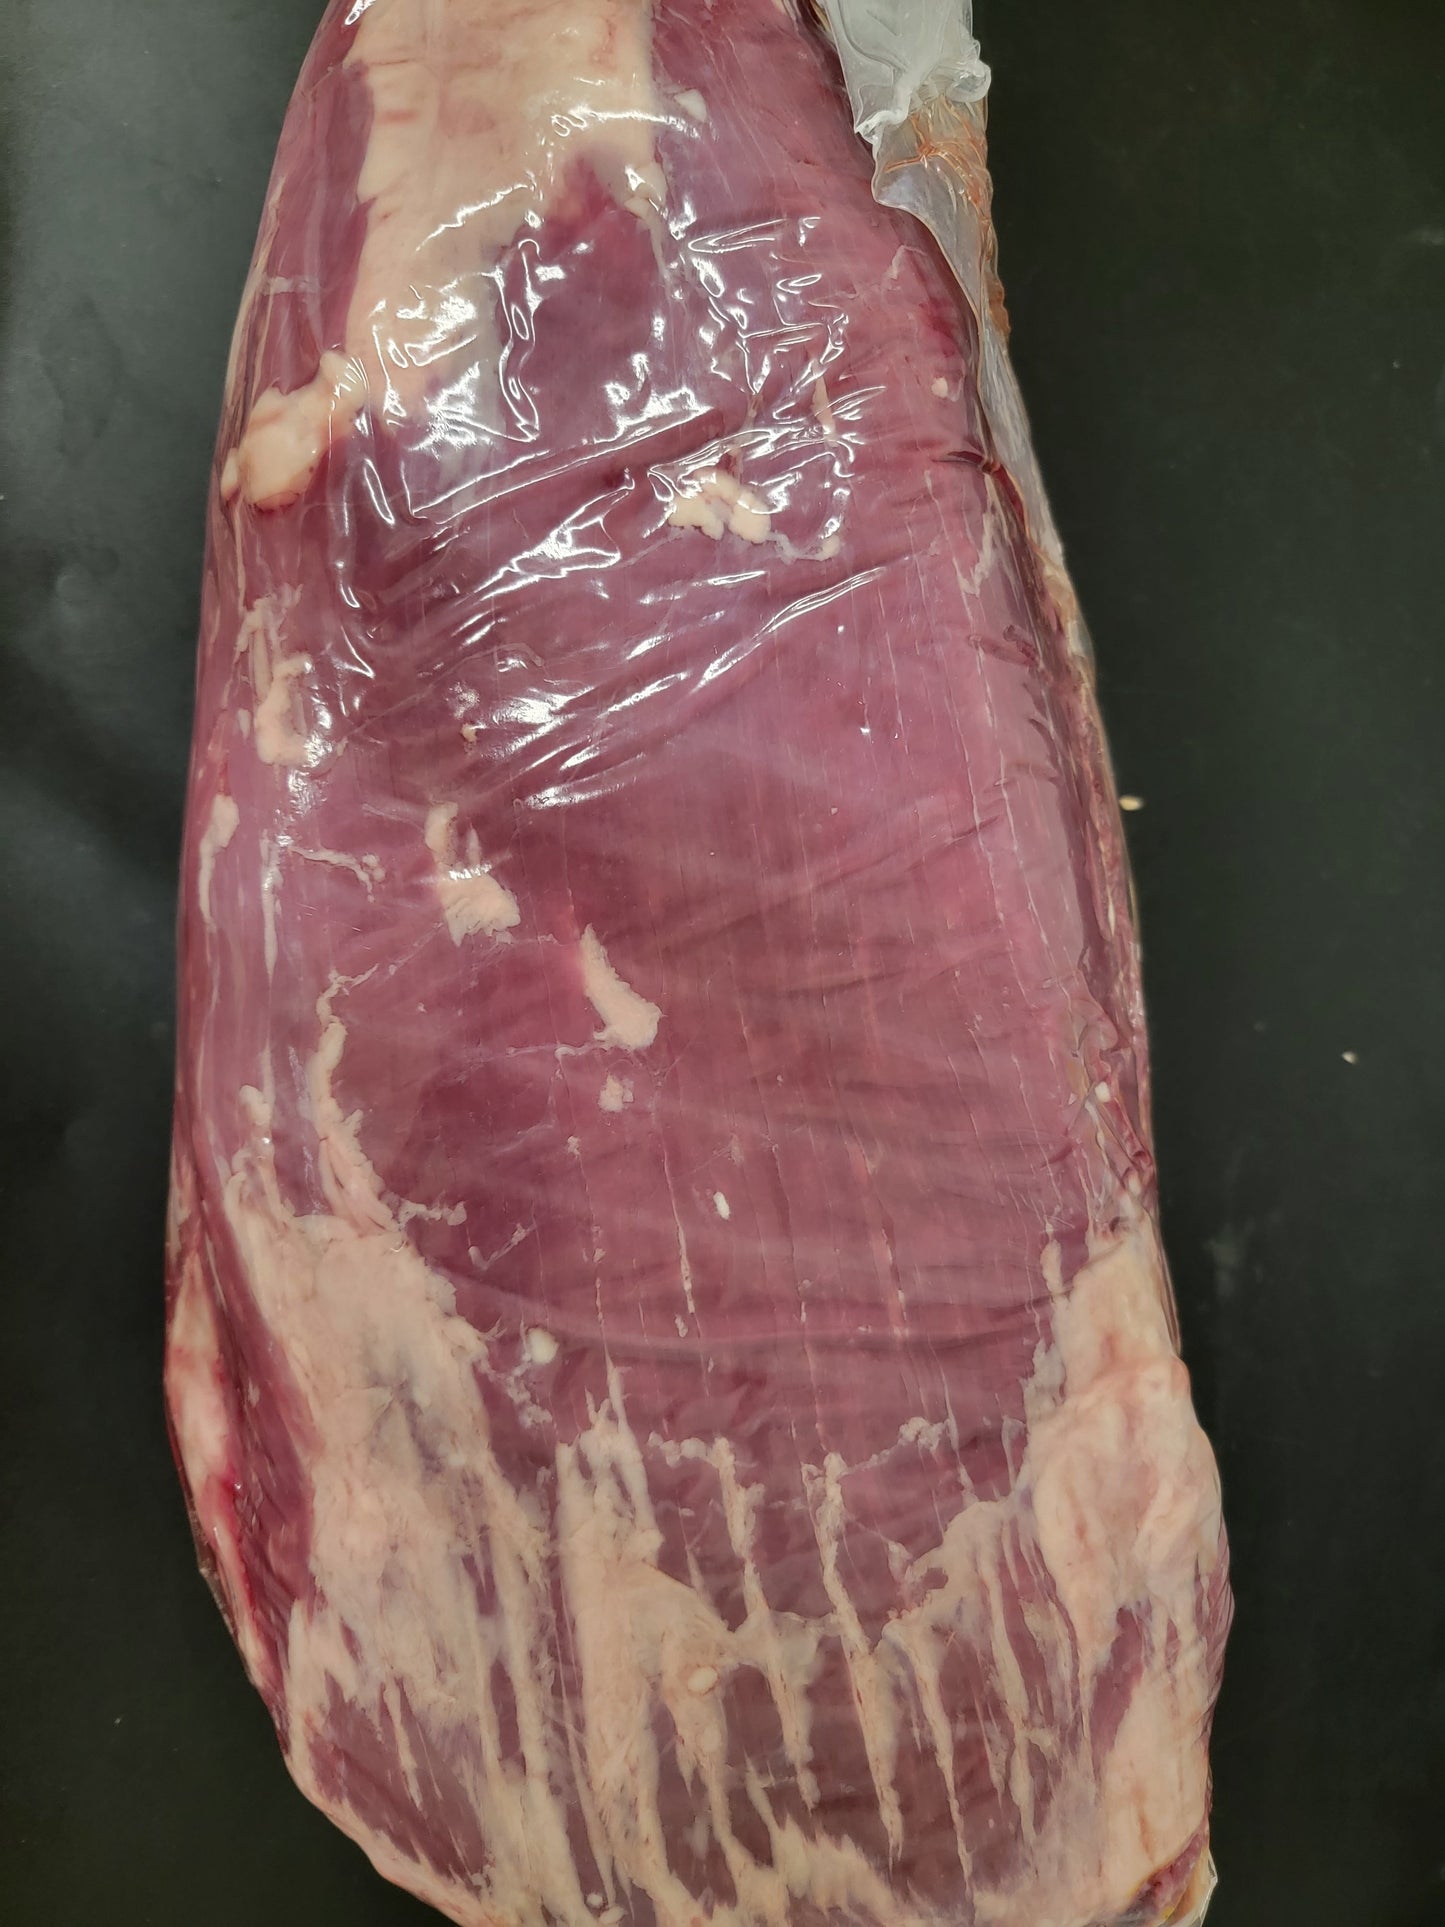 10-15 lbs of Fresh and Natural Beef Flank Steak (Choose Your Weight)